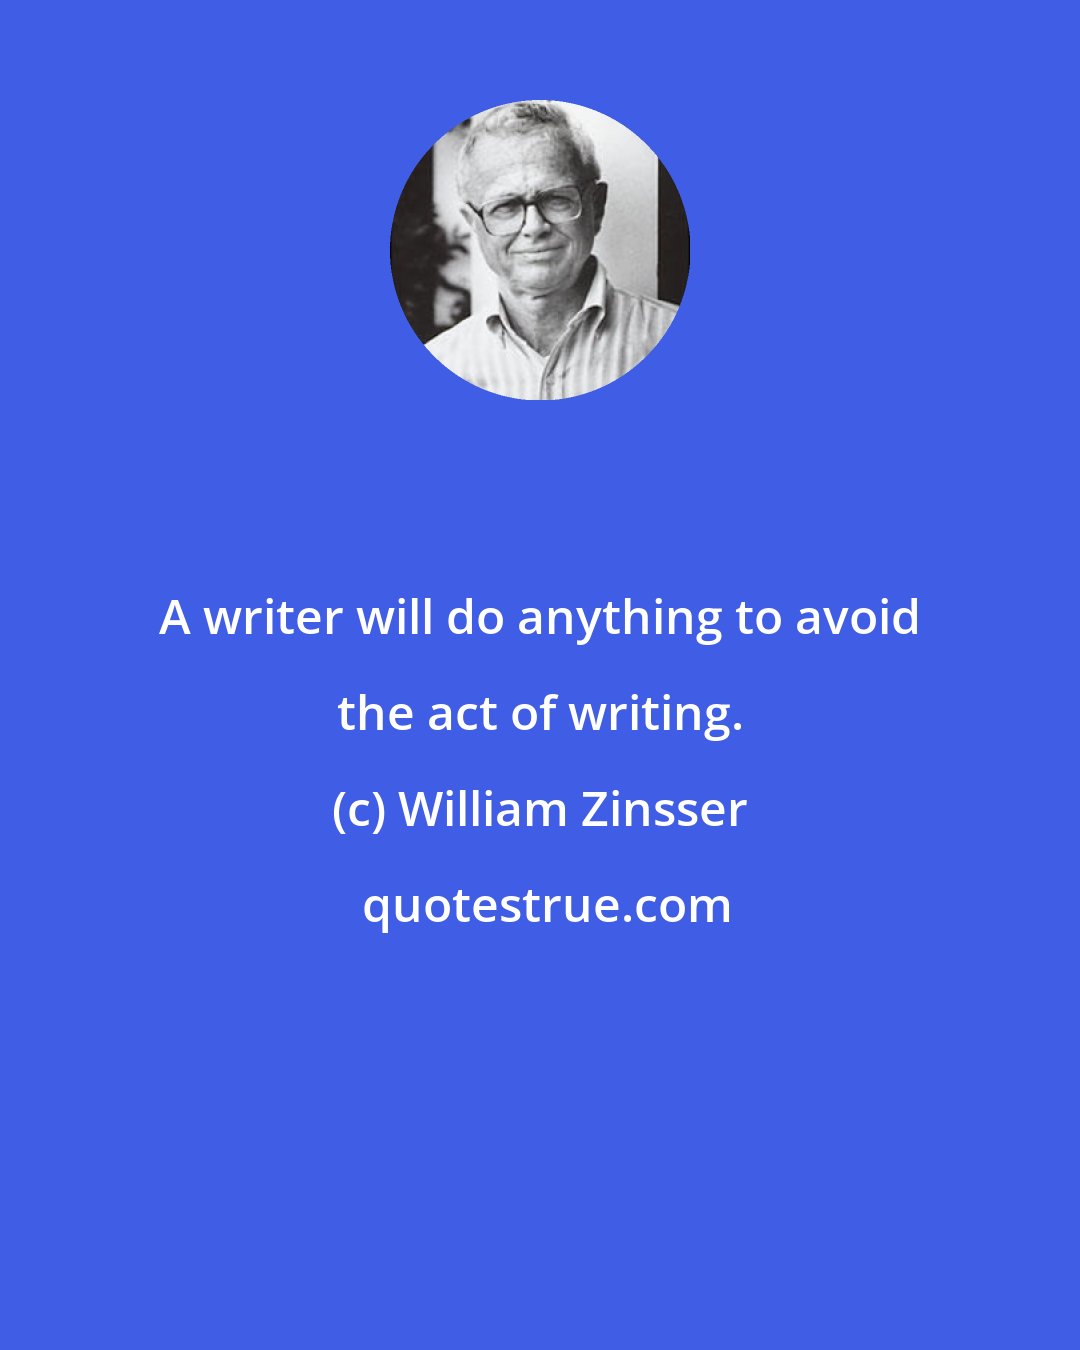 William Zinsser: A writer will do anything to avoid the act of writing.